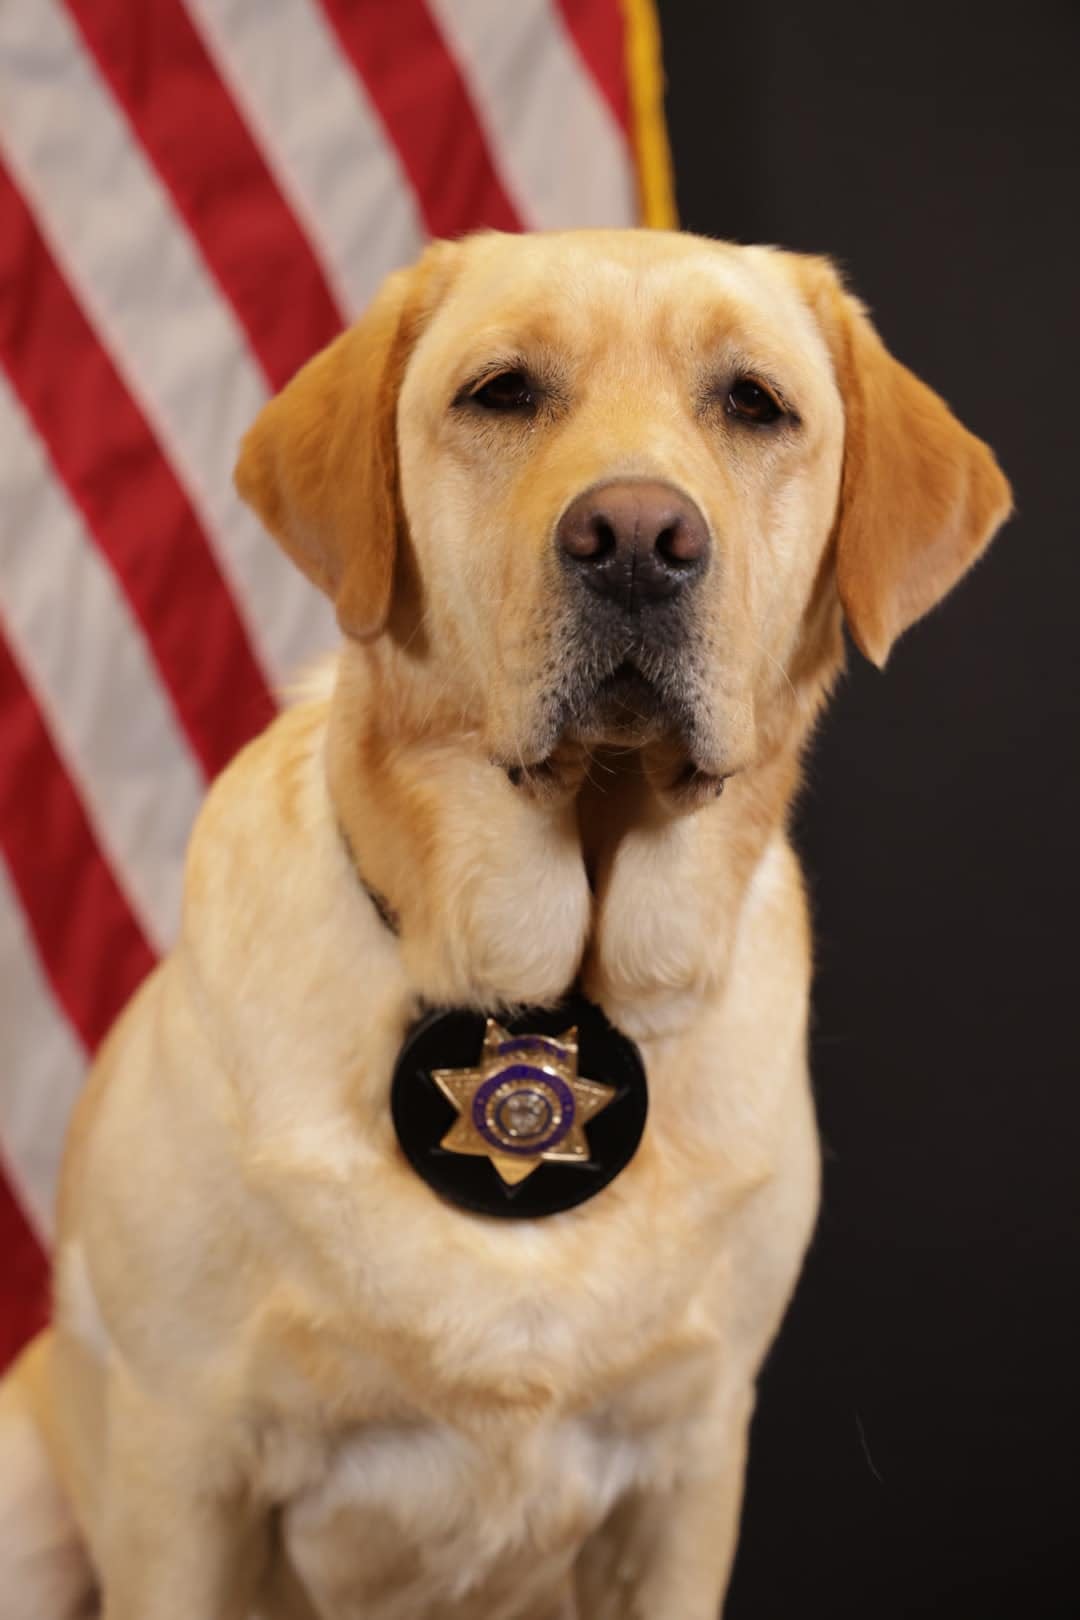 Meet District Attorney team member K-9 Lane, who will support child victims and witnesses in San Bernardino County.